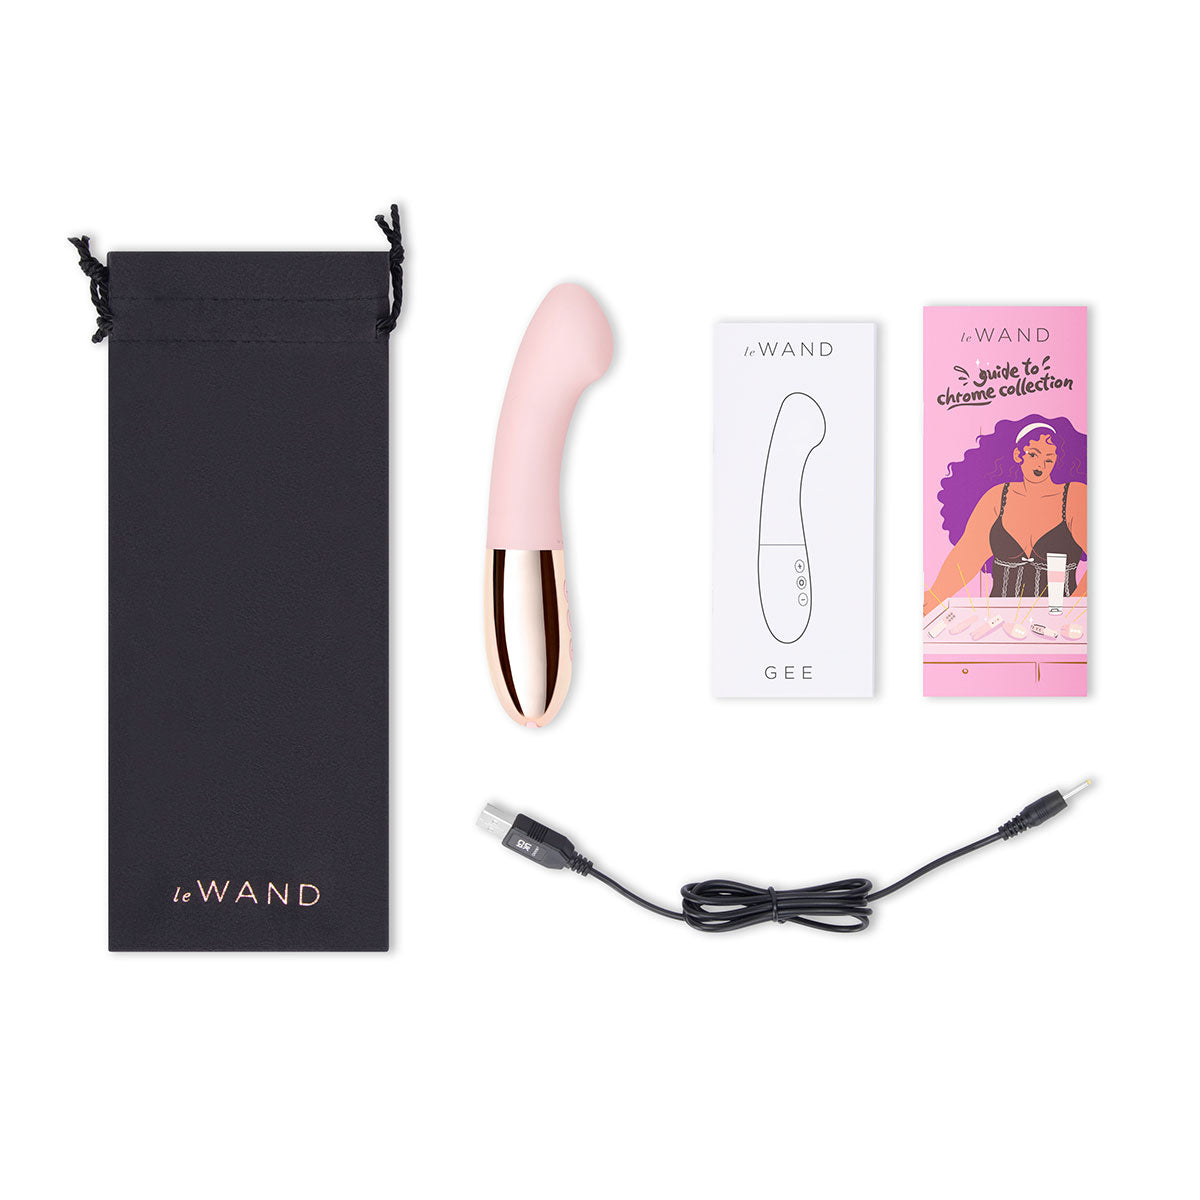 Le Wand Gee - Rose Gold Intimates Adult Boutique